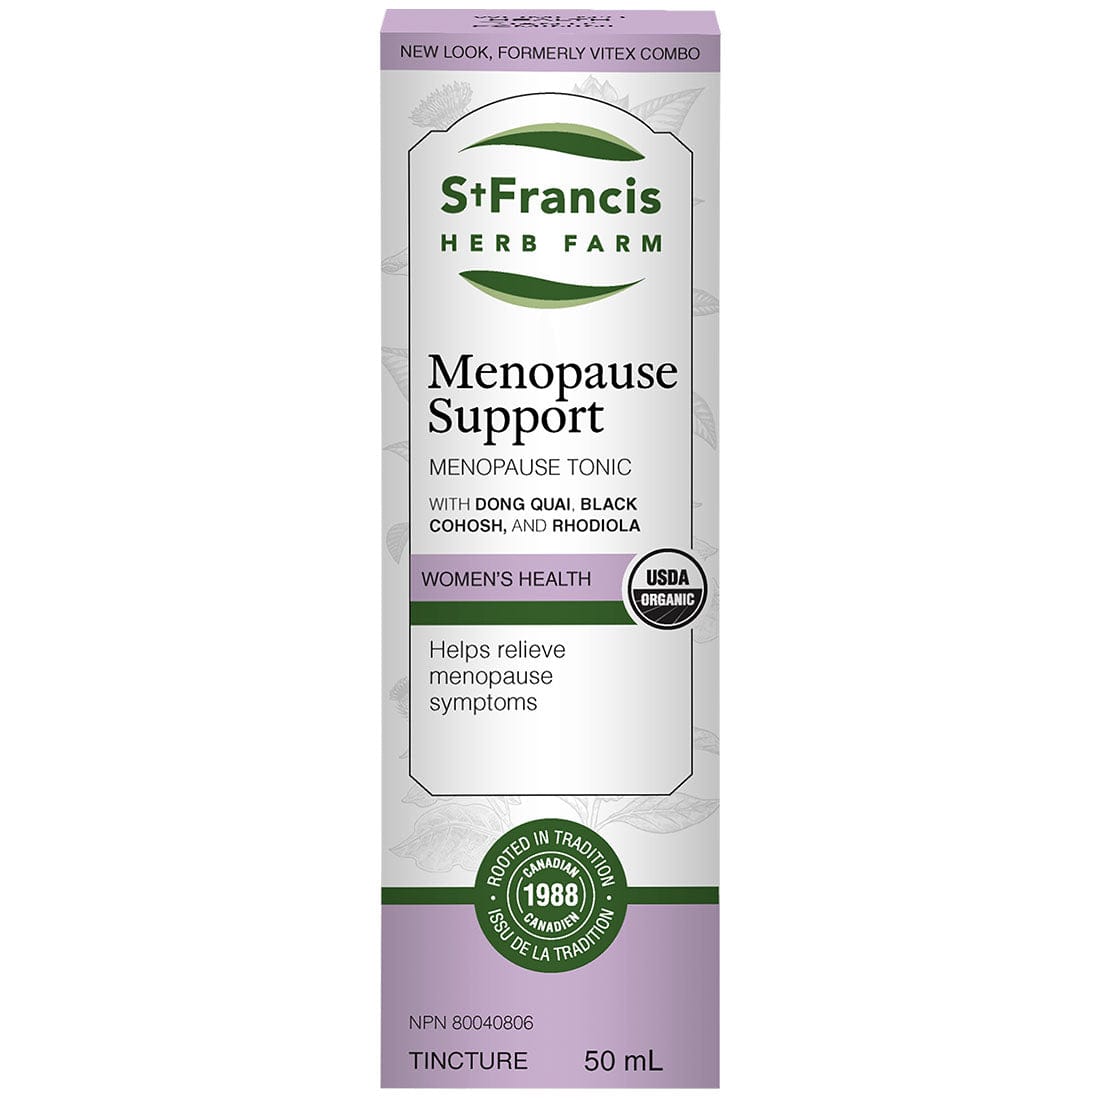 St. Francis Menopause Support (Formerly Vitex Combo - Menopause)